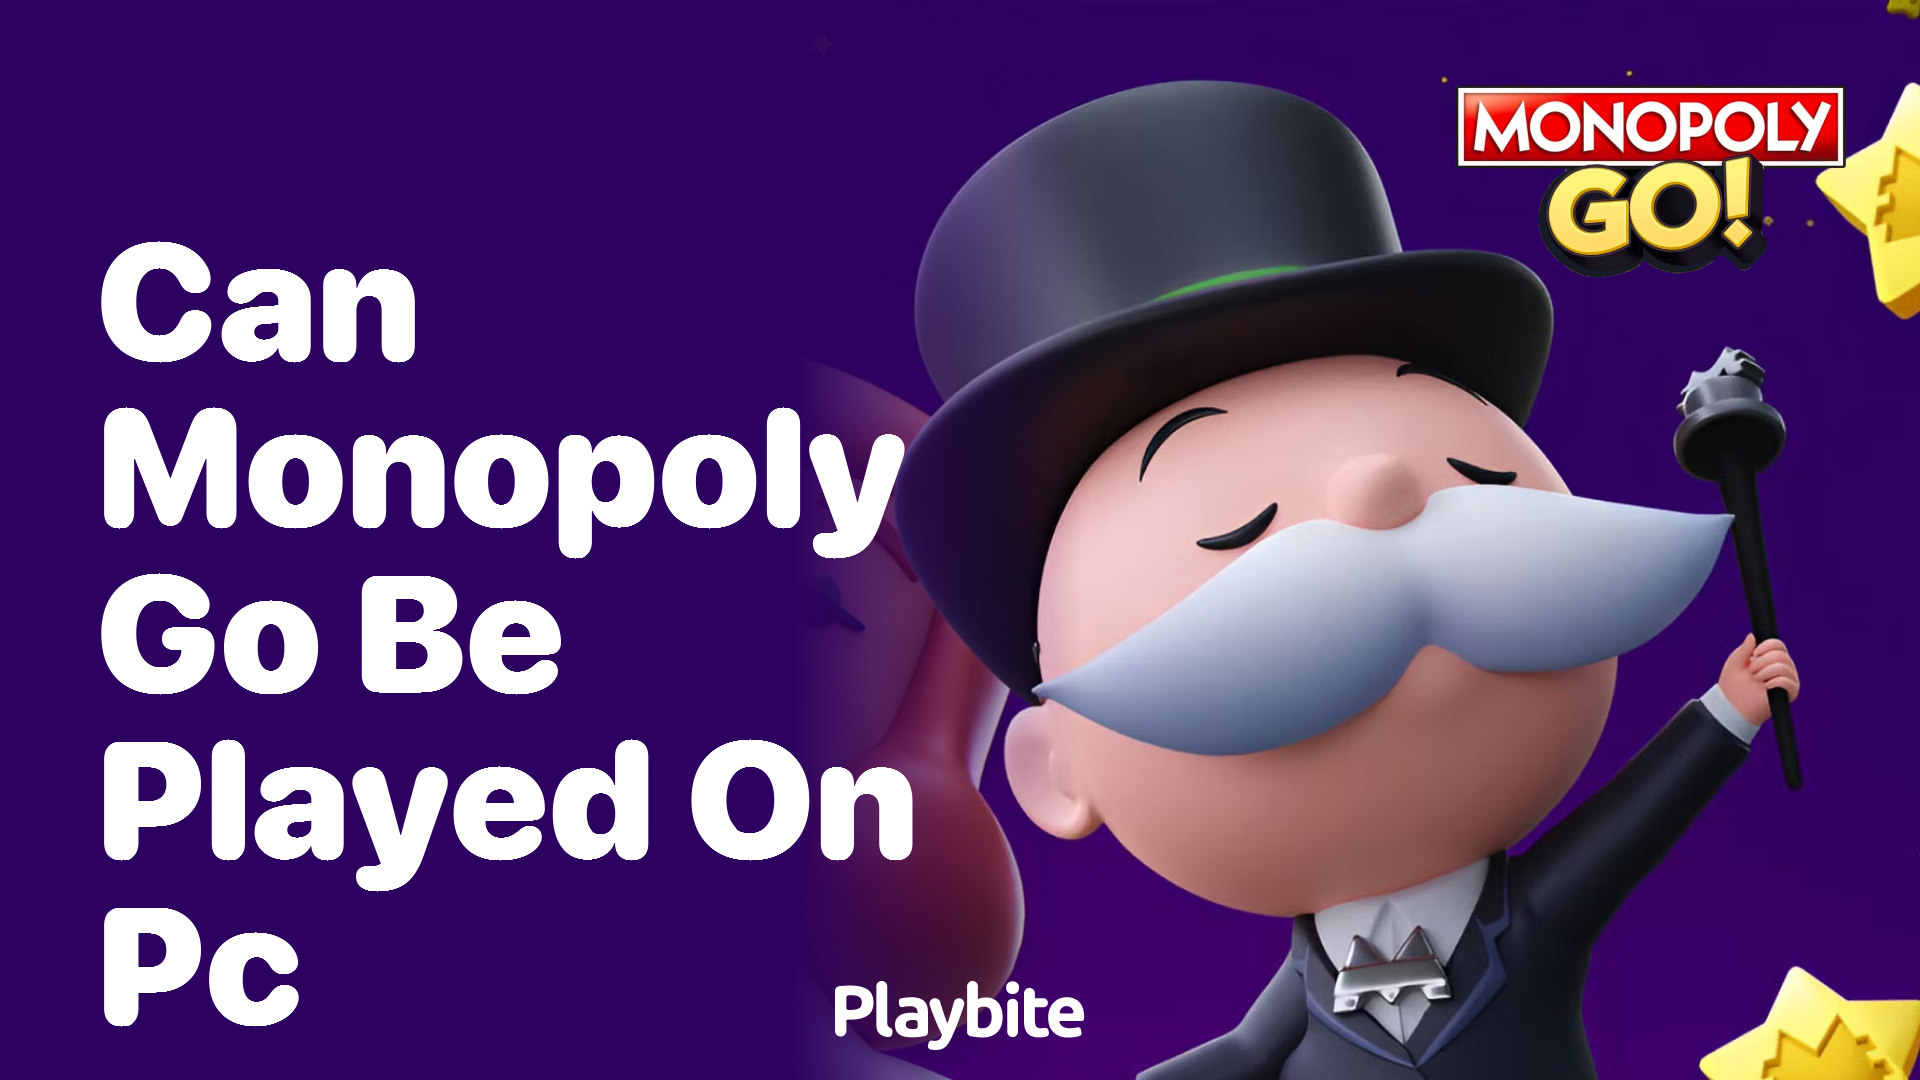 Can Monopoly Go Be Played on PC? Find Out Here!